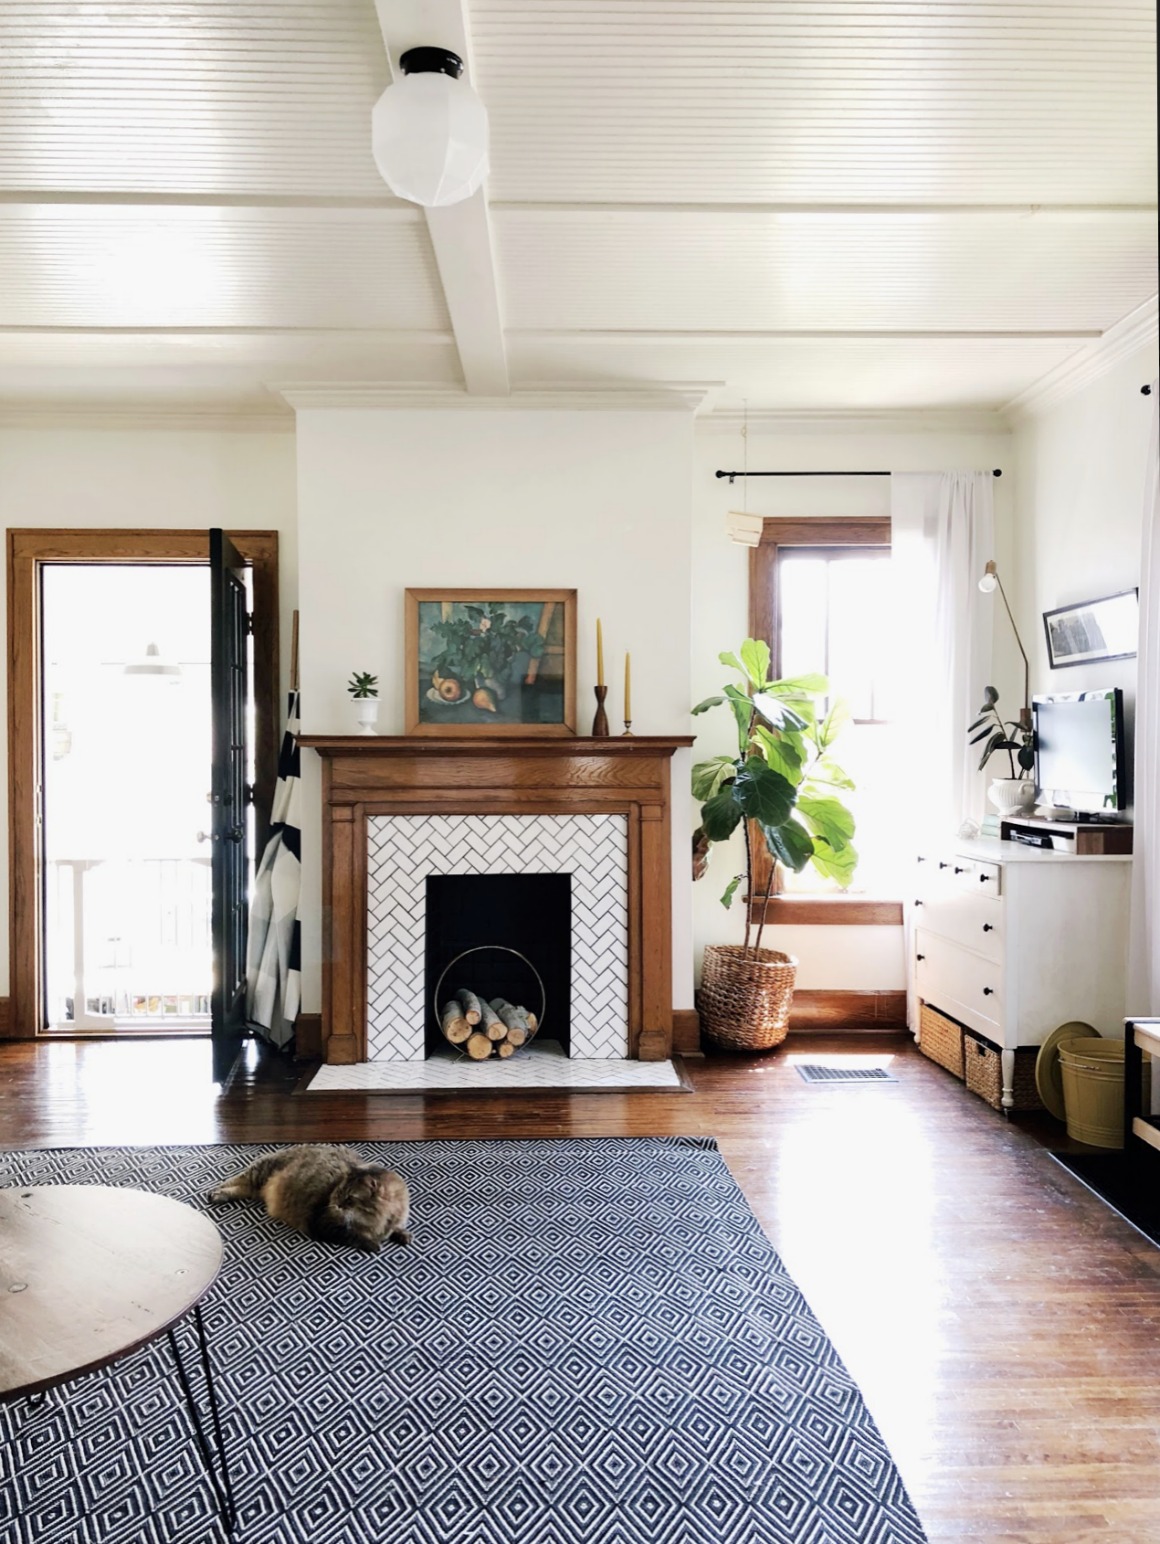 Small Space Living- See inside this Craftsman Style Home